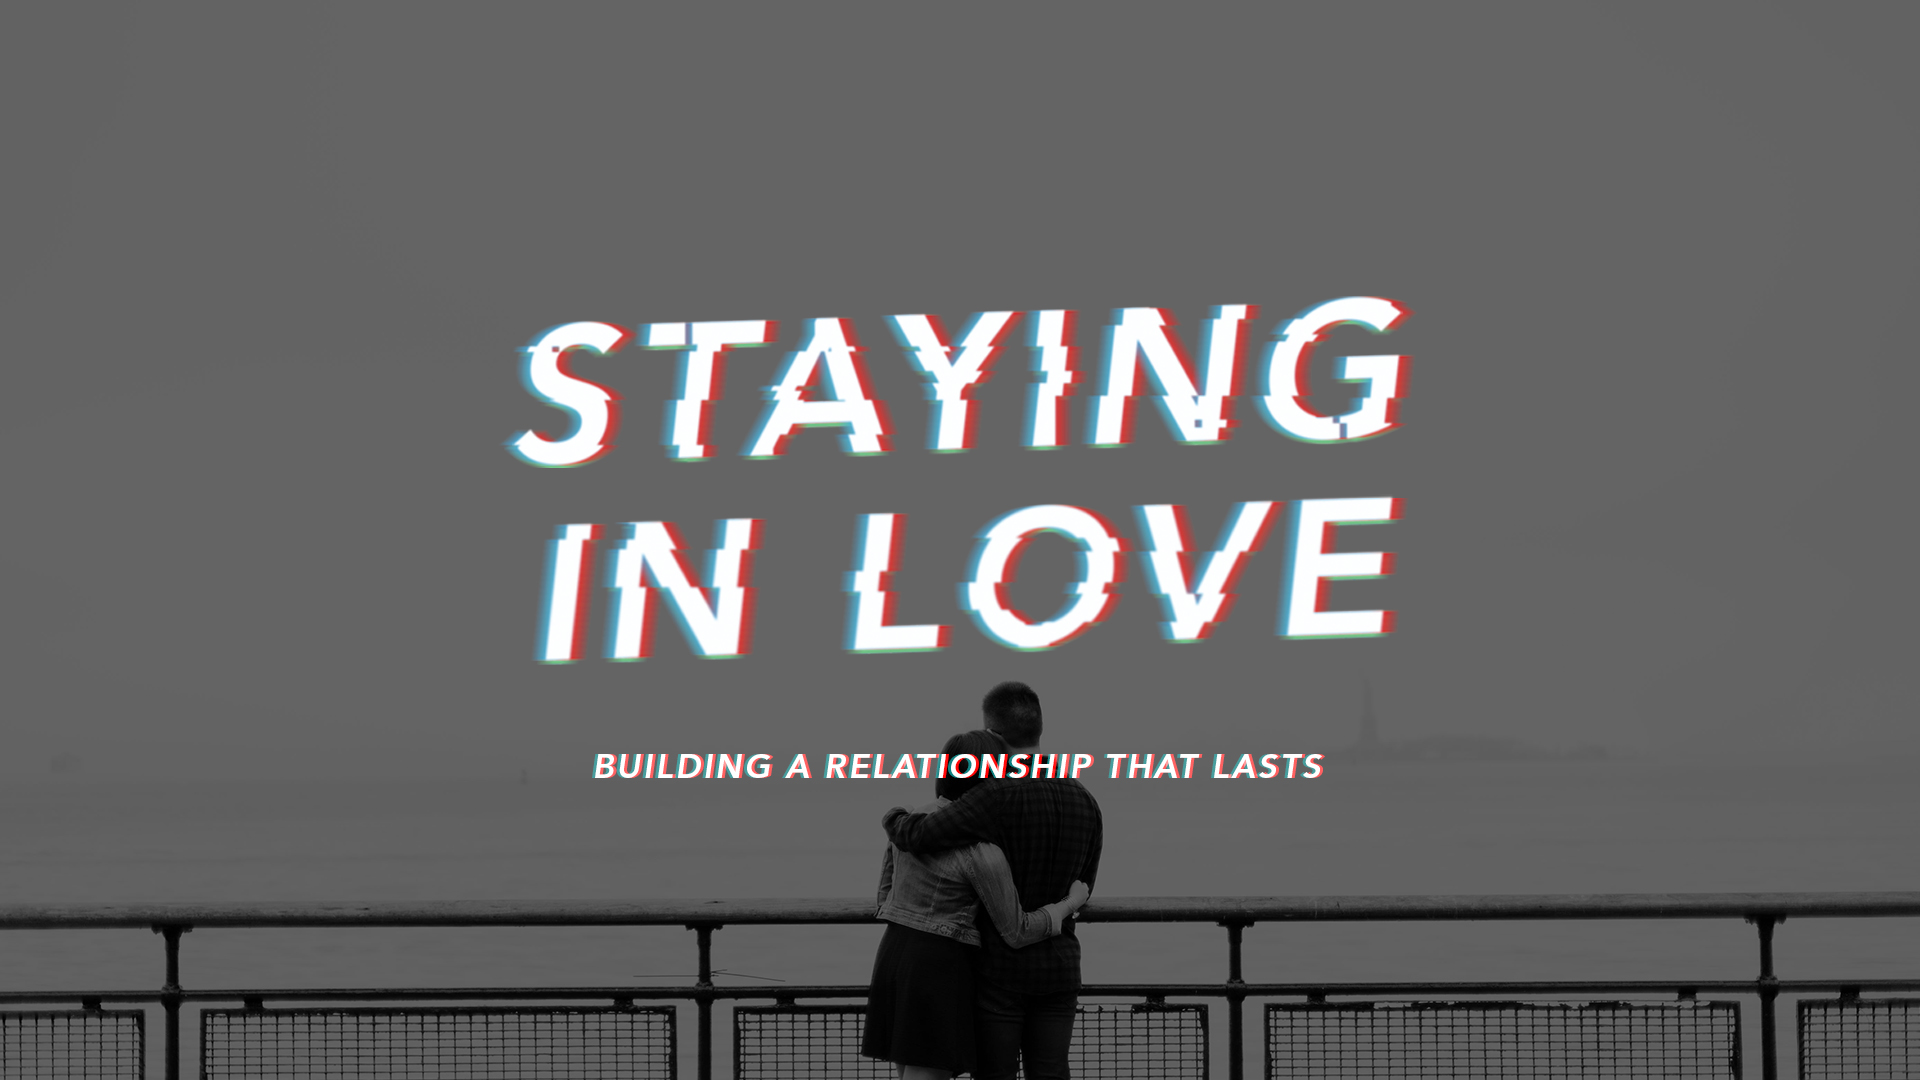 Staying in Love | February 2018